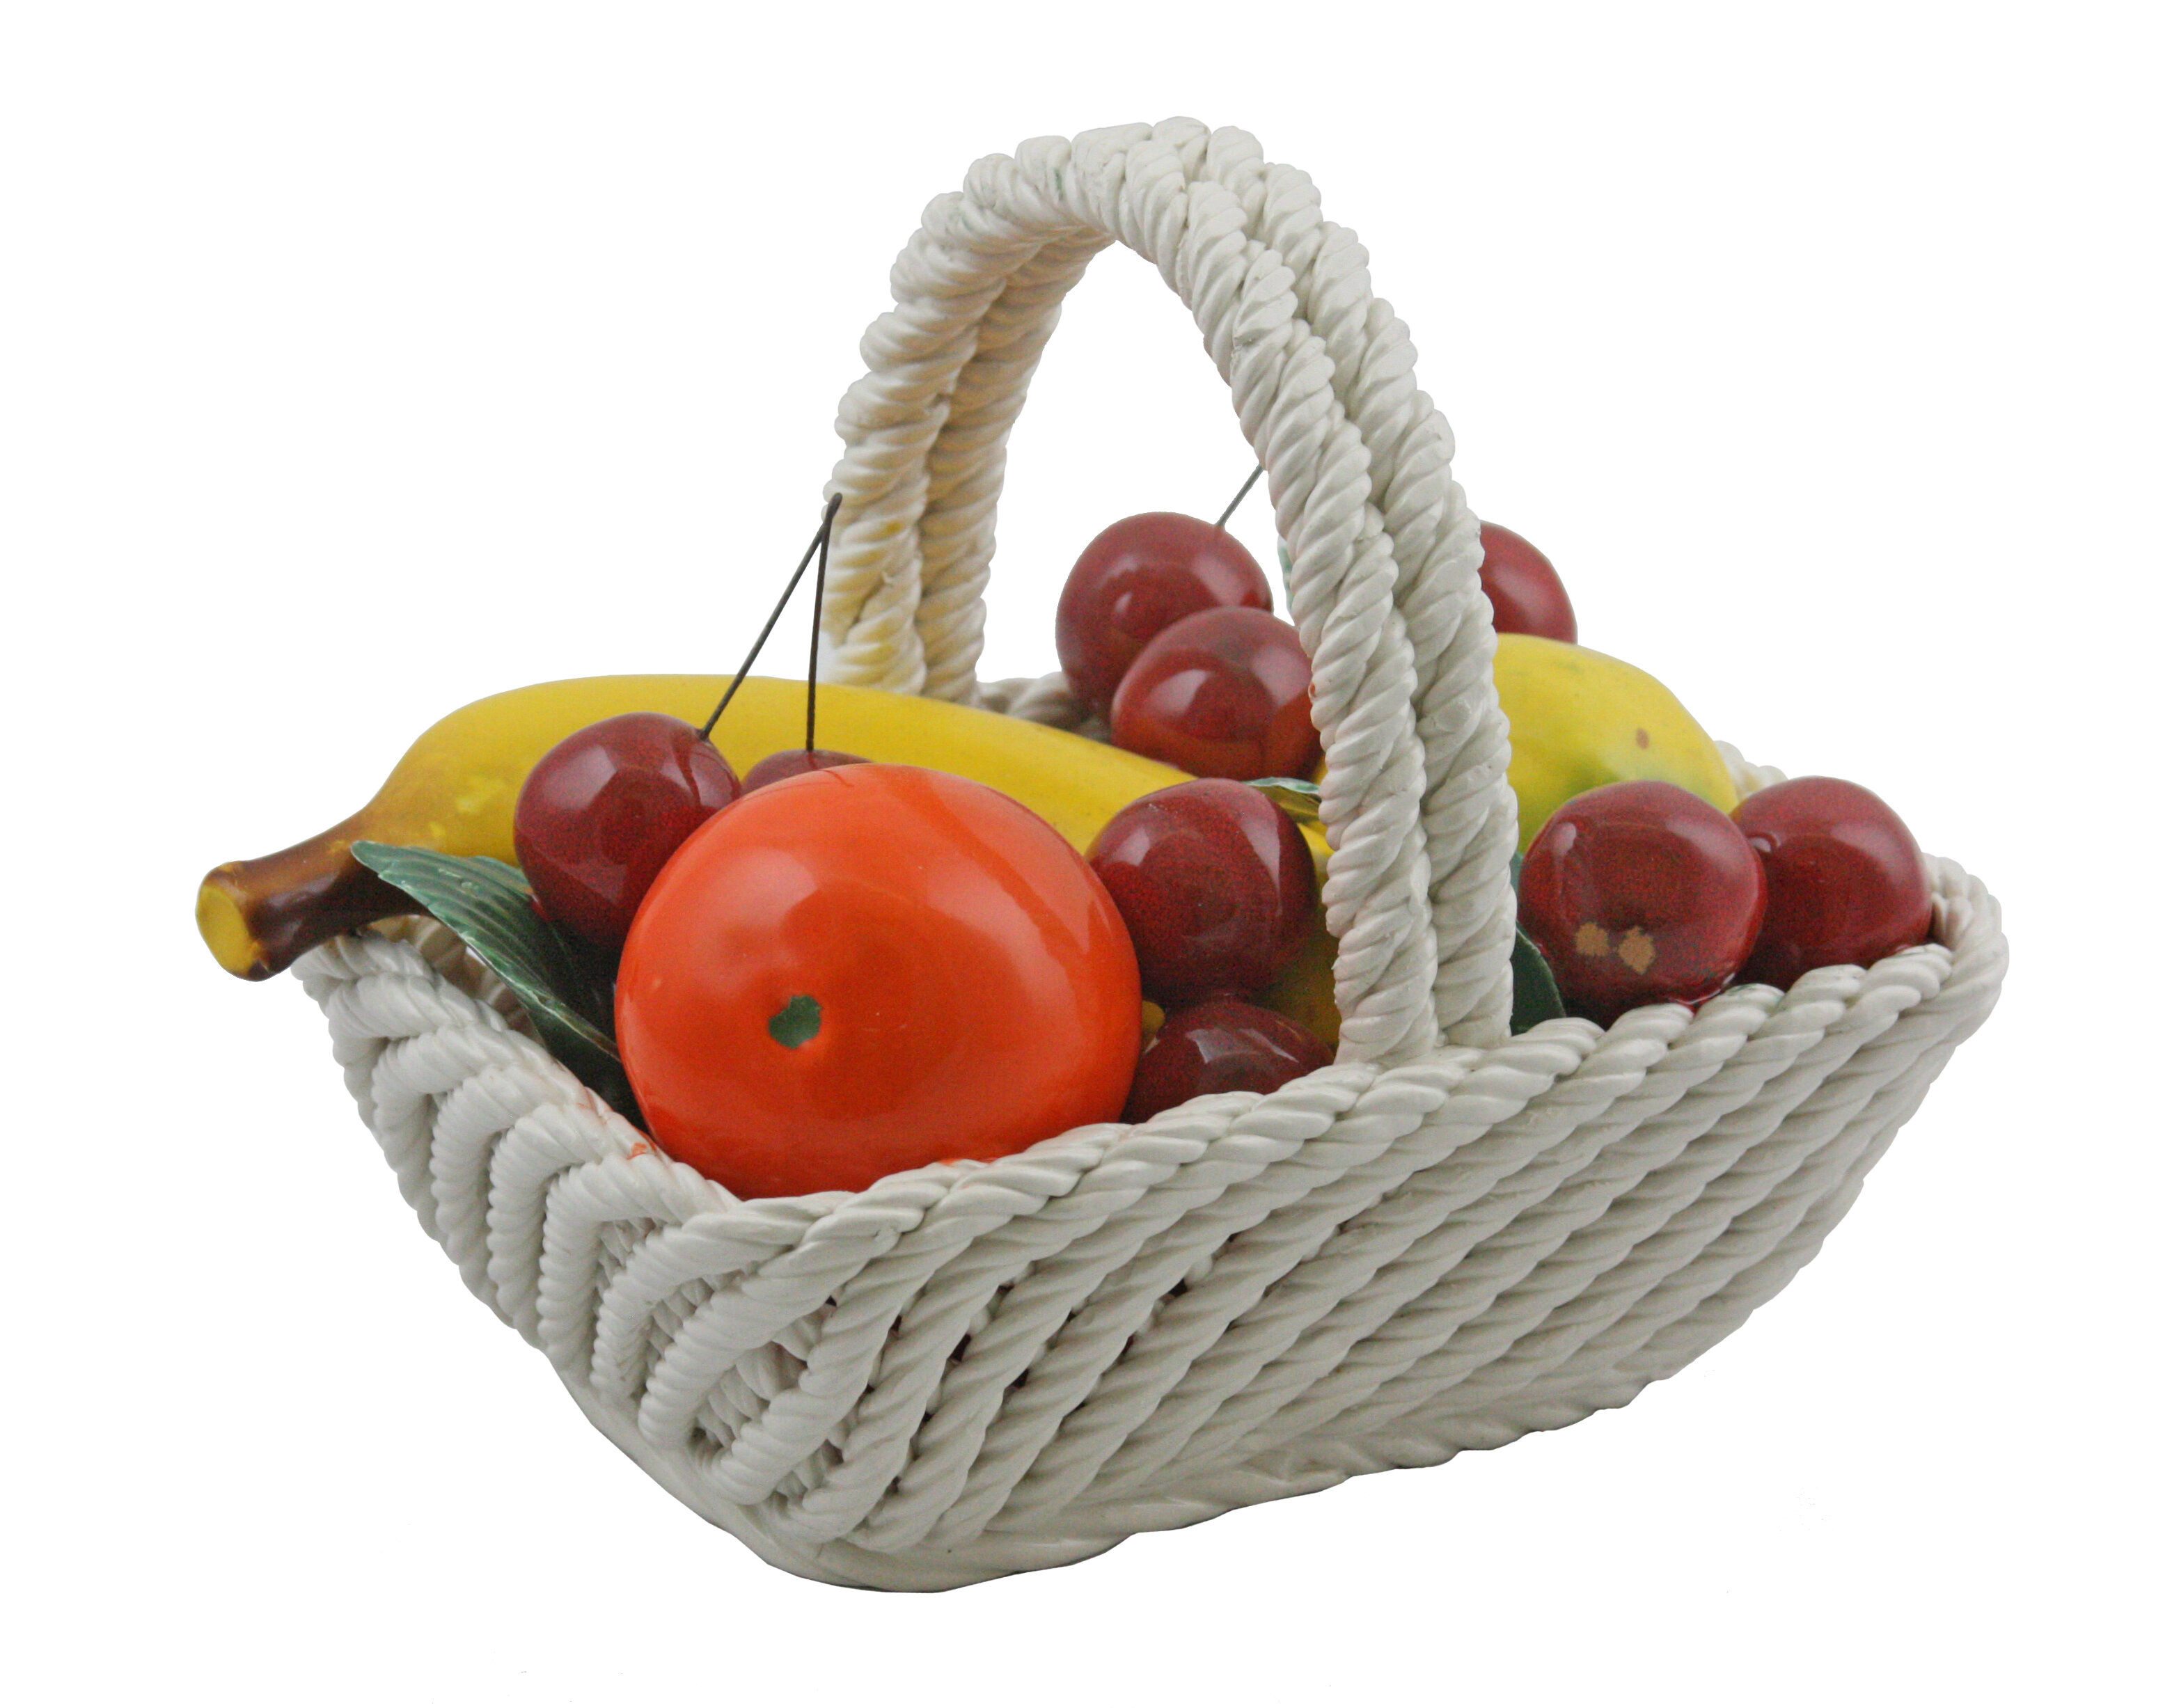 Pair of Faux Fruit Arrangements in Baskets For Sale at 1stDibs